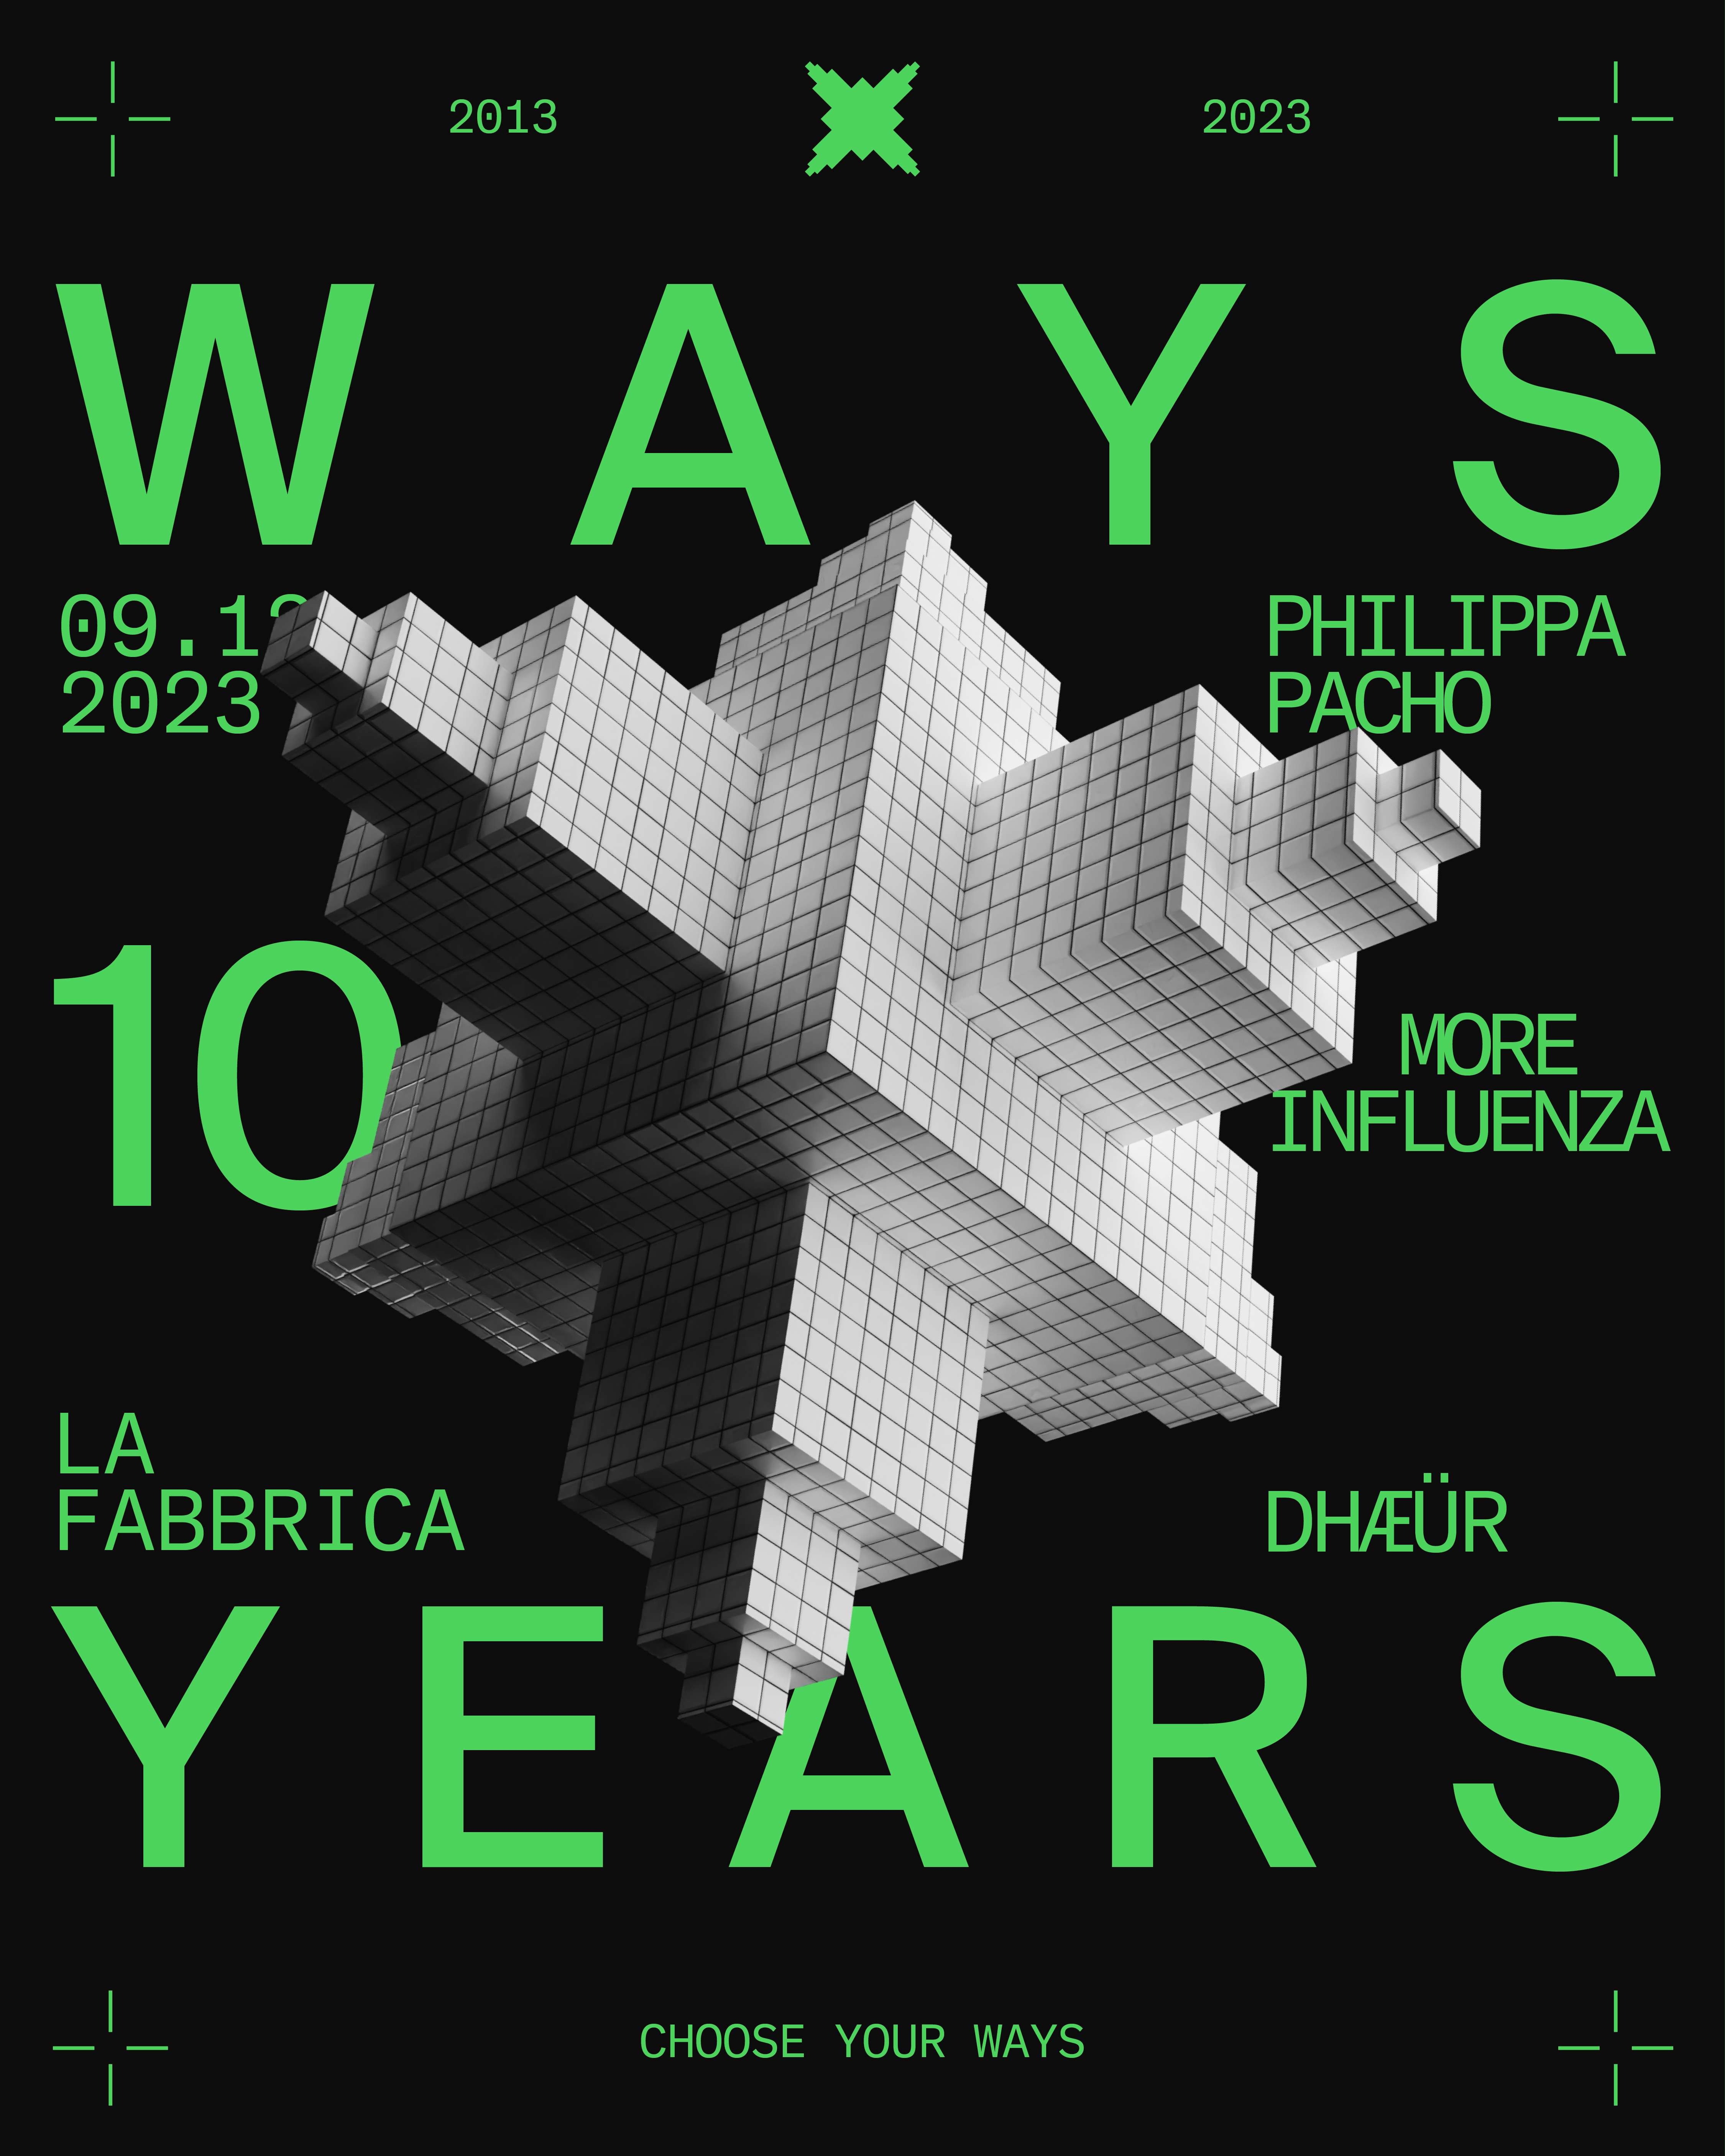 10 Years of WAYS with Philippa Pacho, More Influenza & Dhæür - Página frontal